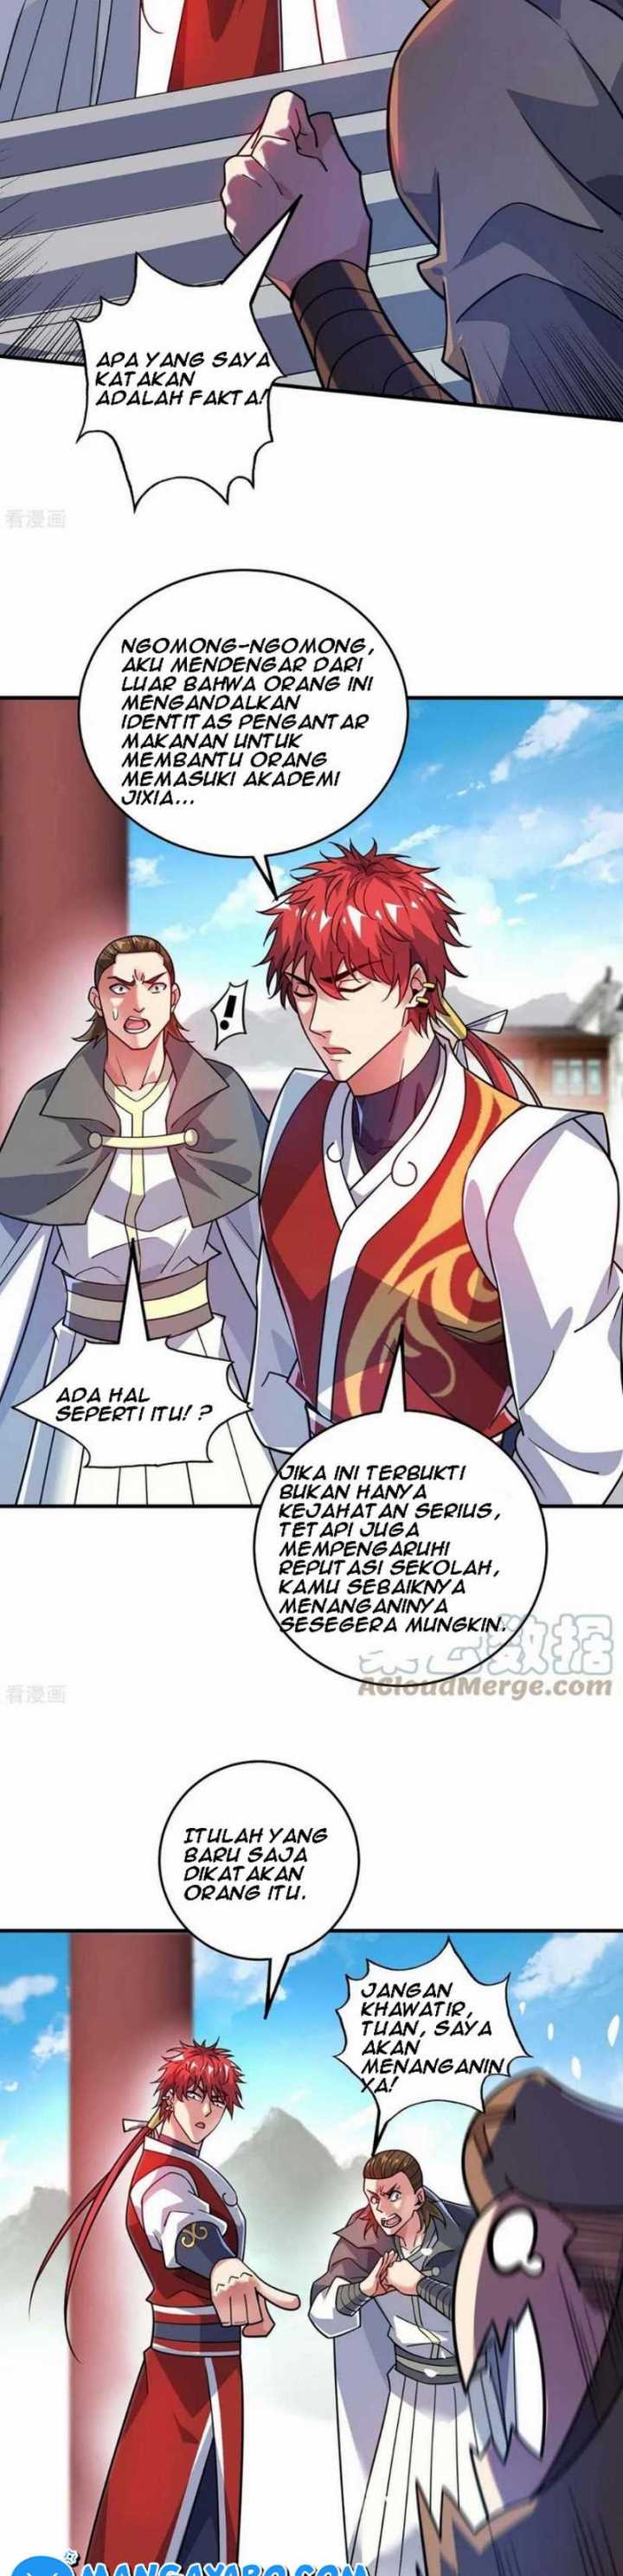 The First Son-In-Law Vanguard of All Time Chapter 171